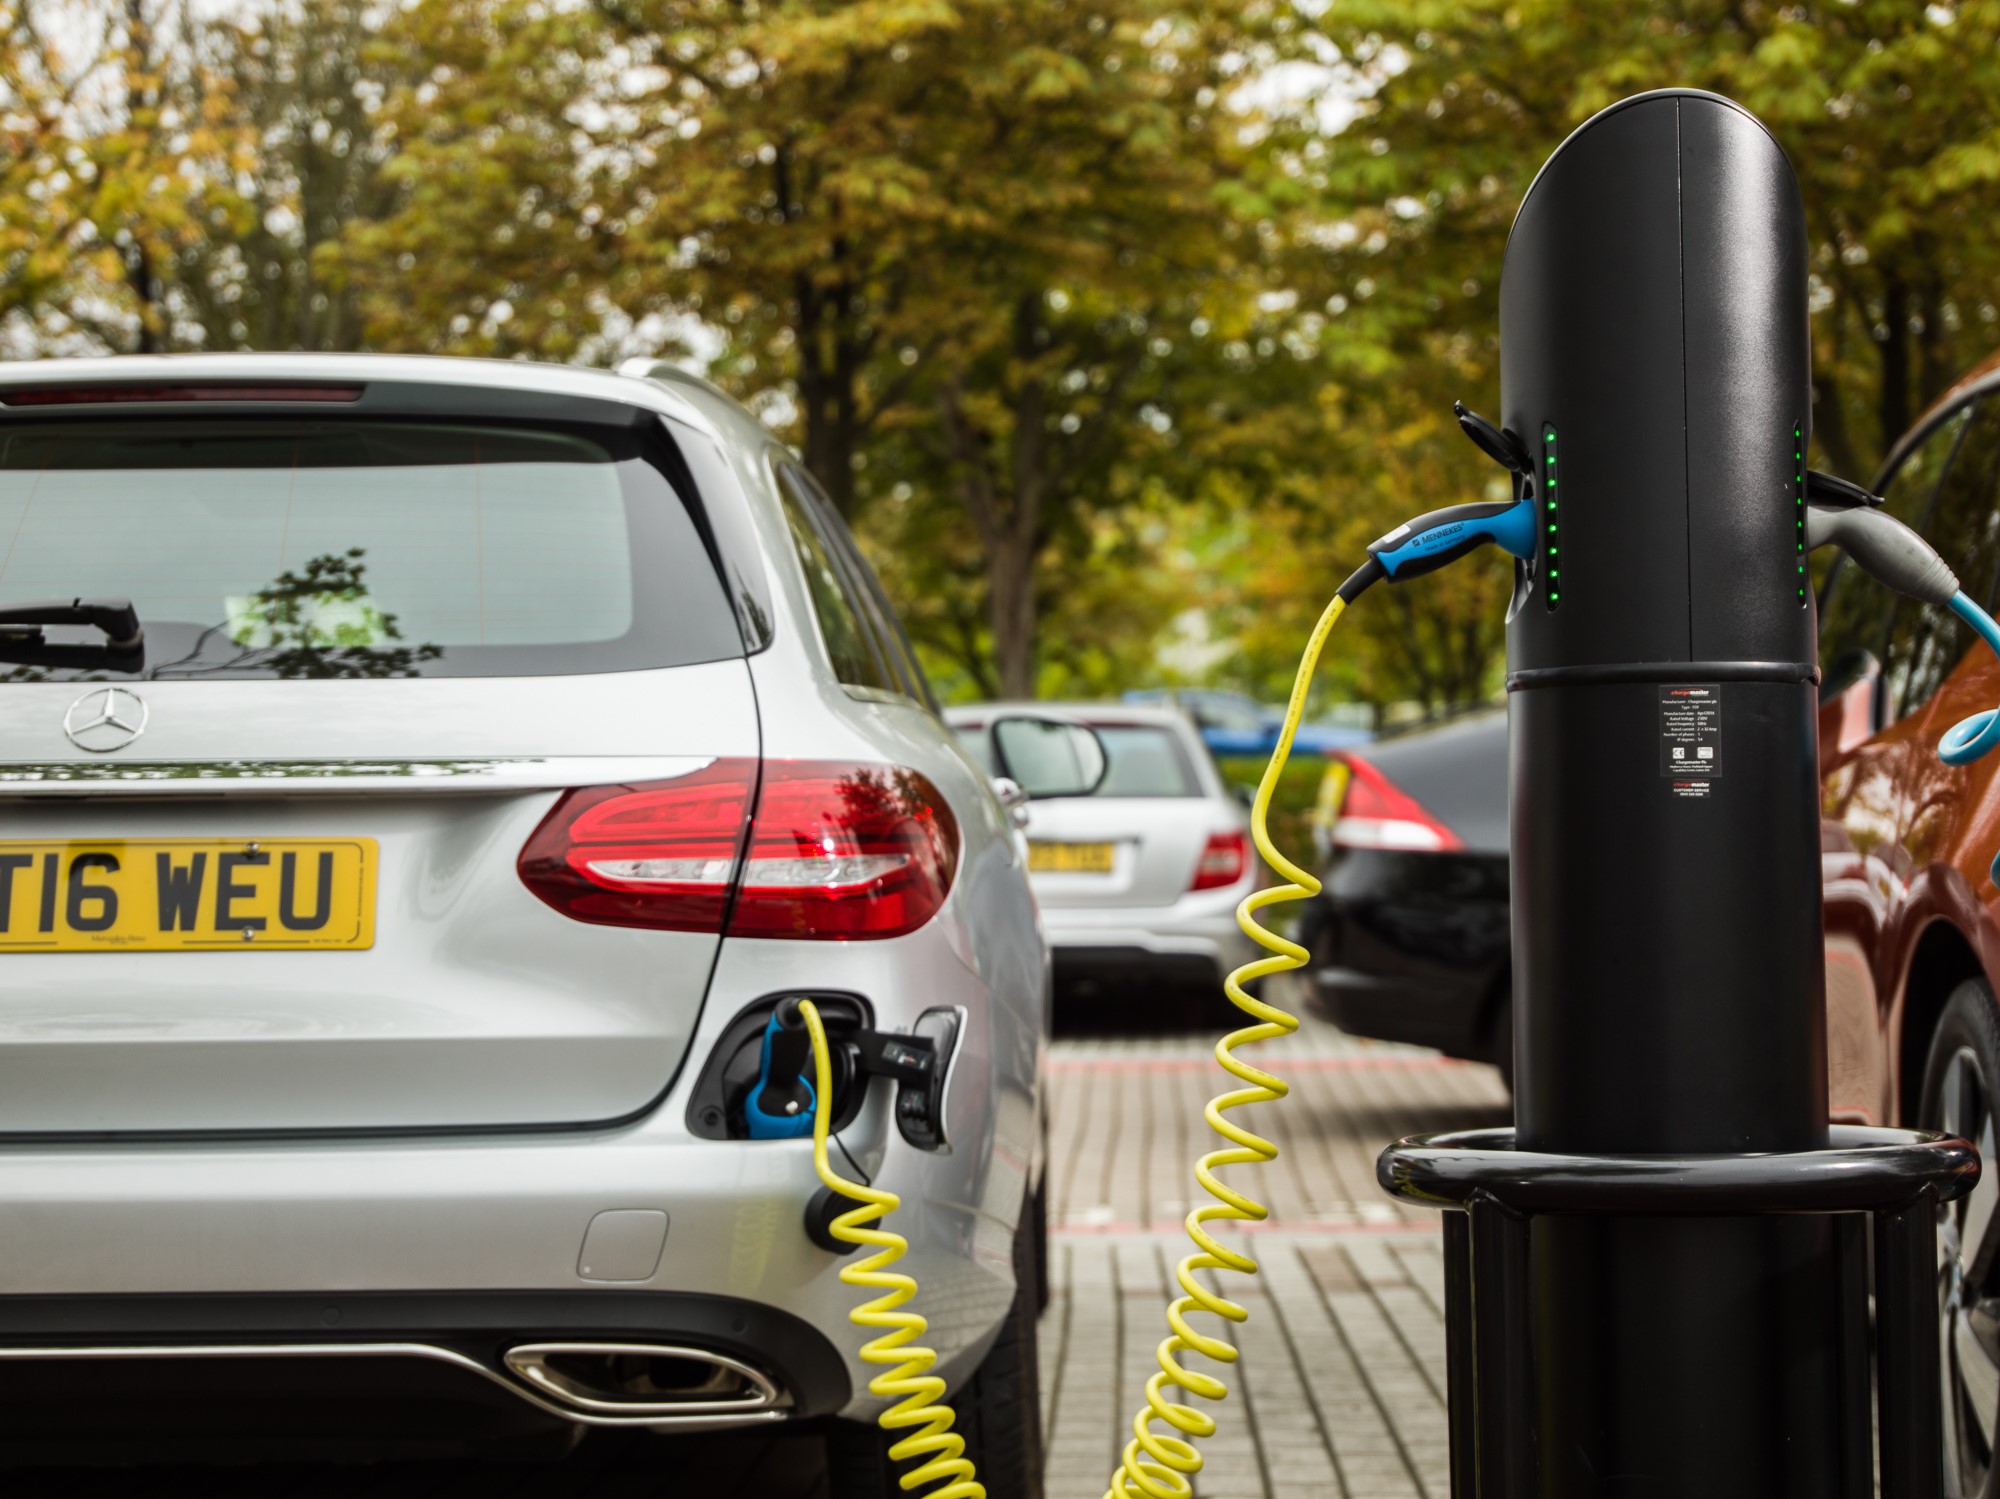 Chargemaster offers up to £1,000 off workplace charging for visitors of Fully Charged LIVE